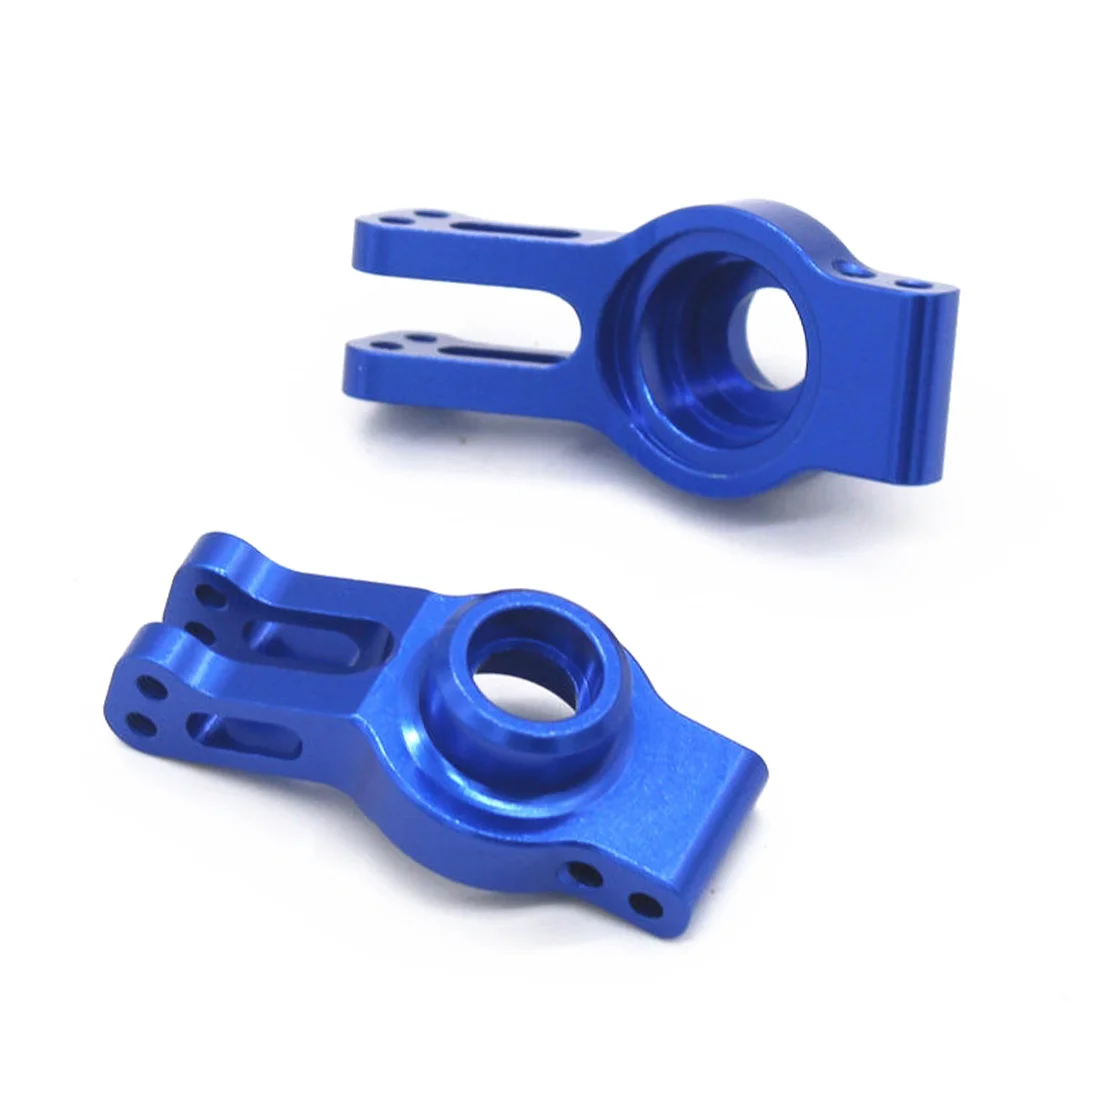 

Metal Rear Hub Carrier Rear Stub Axle Carrier for Wltoys 104009 12402-A RC Car Upgrades Parts Accessories,Blue